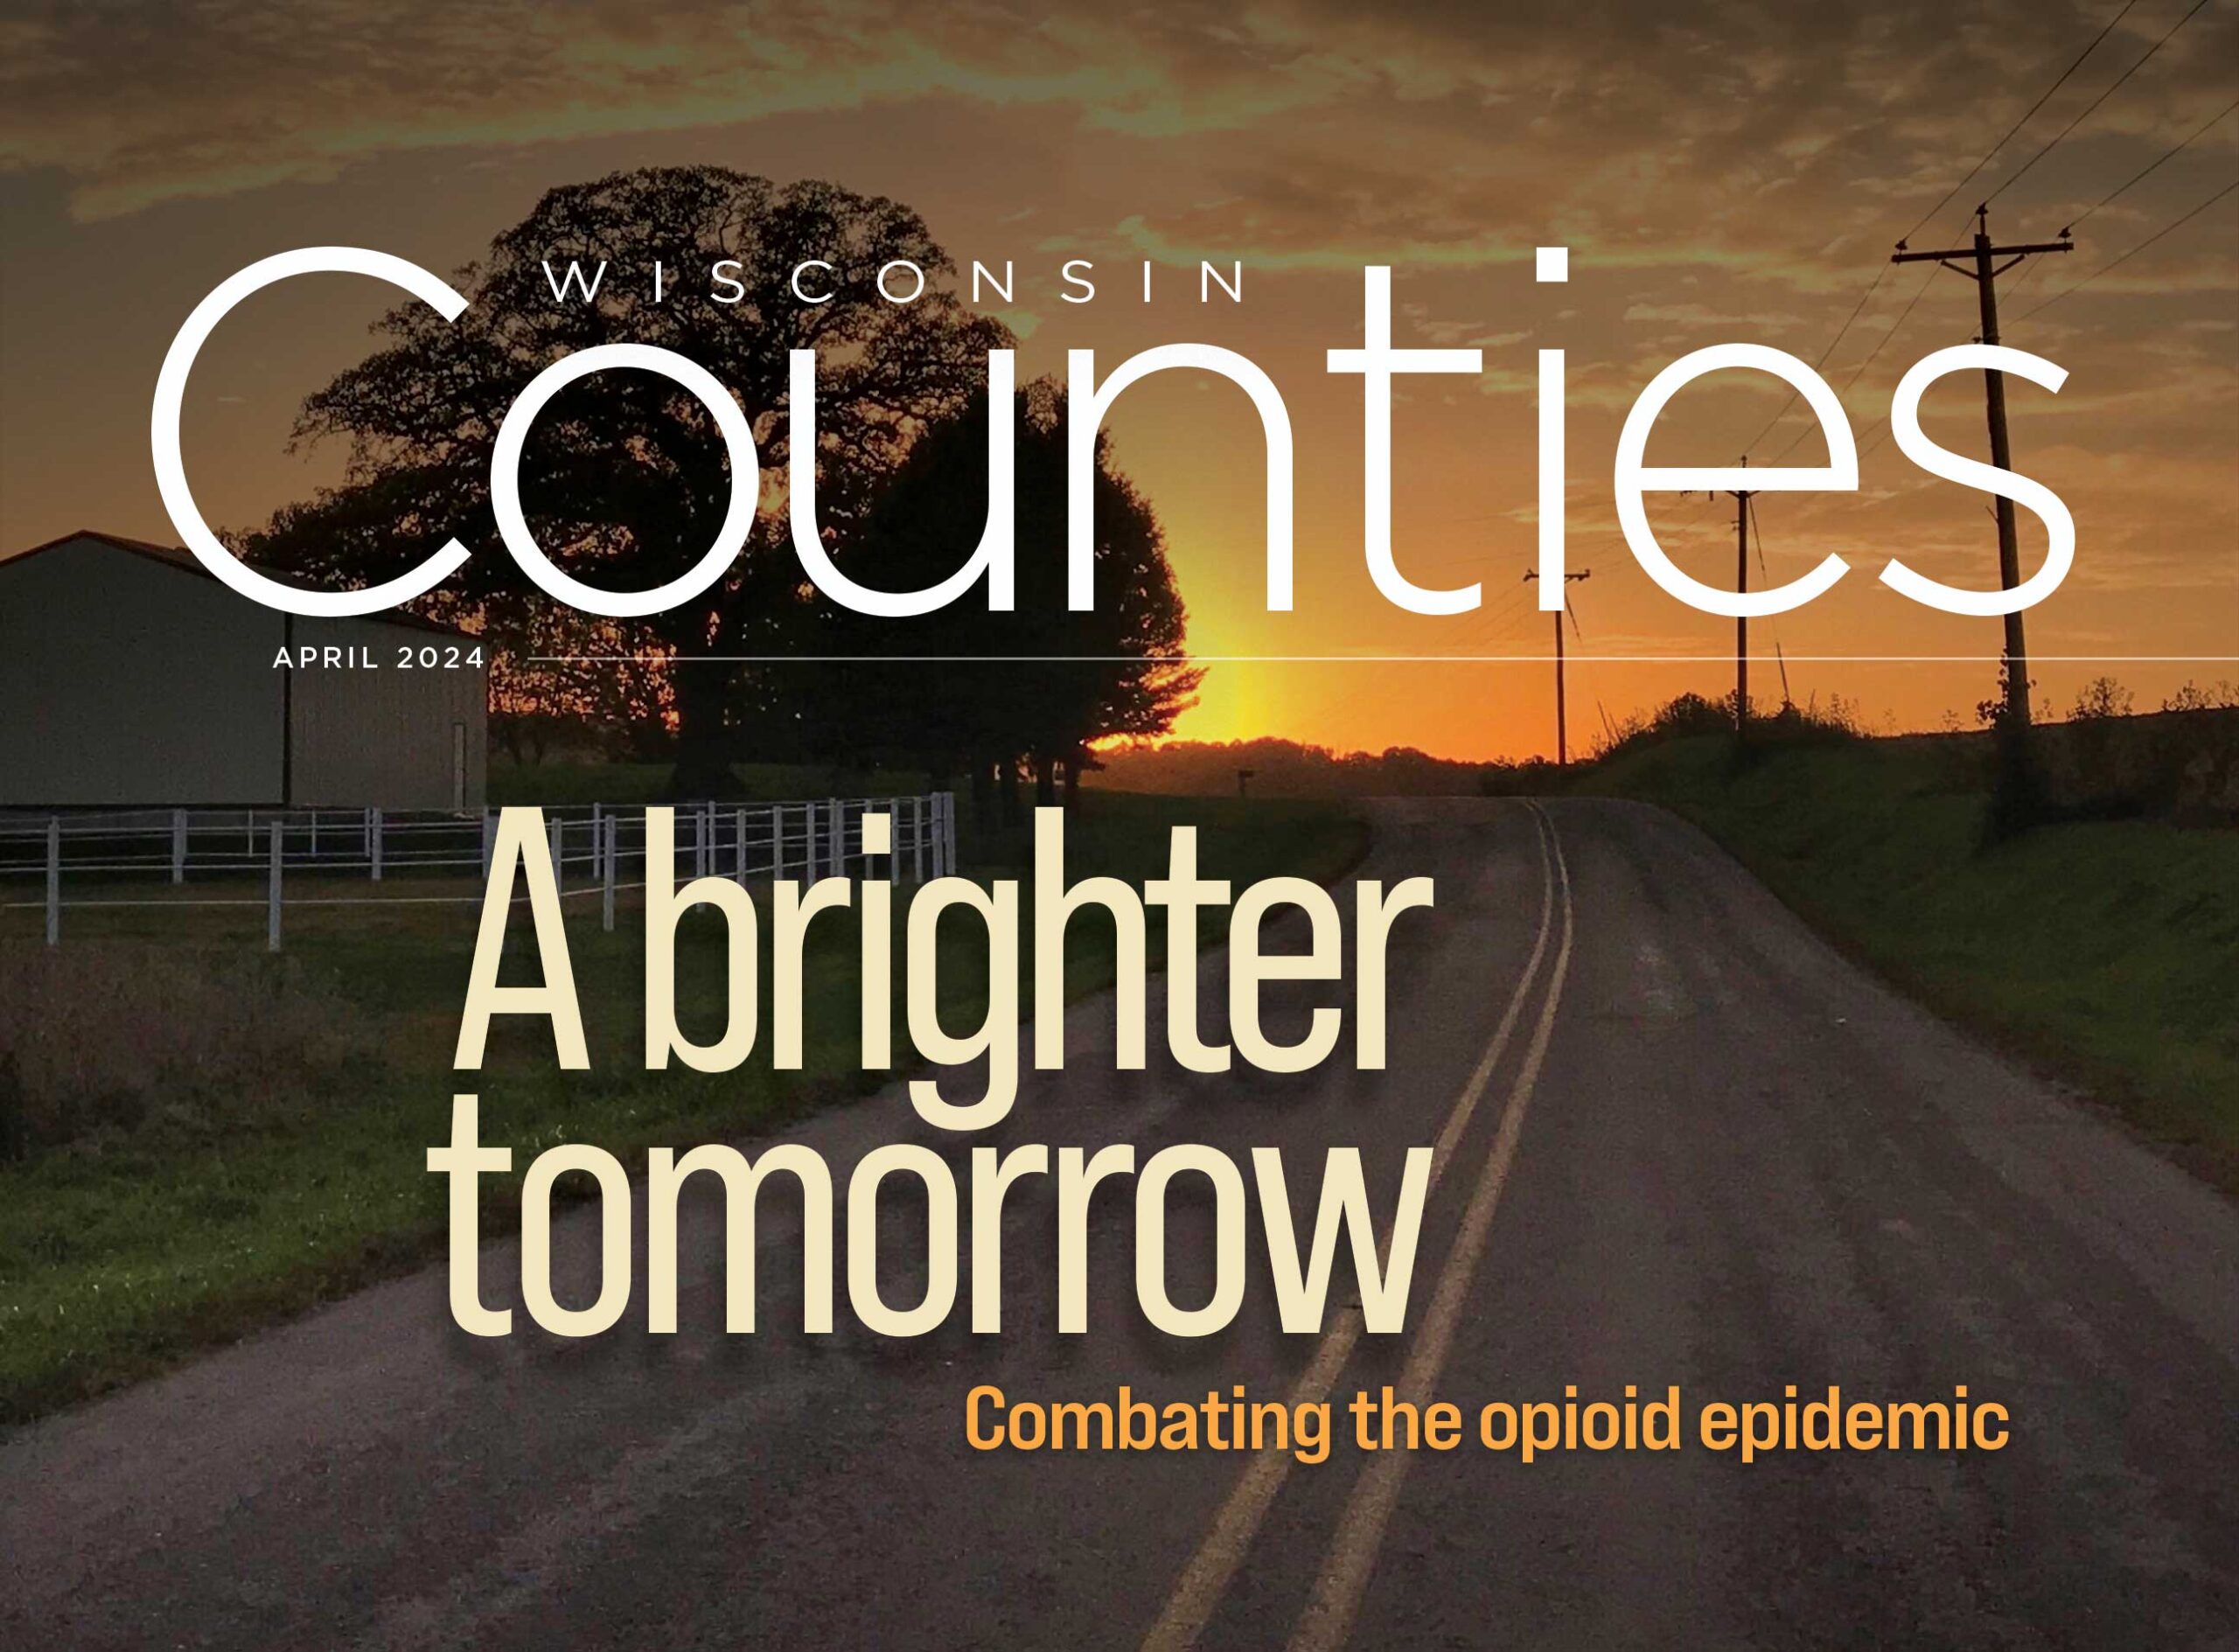 A Brighter Tomorrow: Combating the Opioid Epidemic